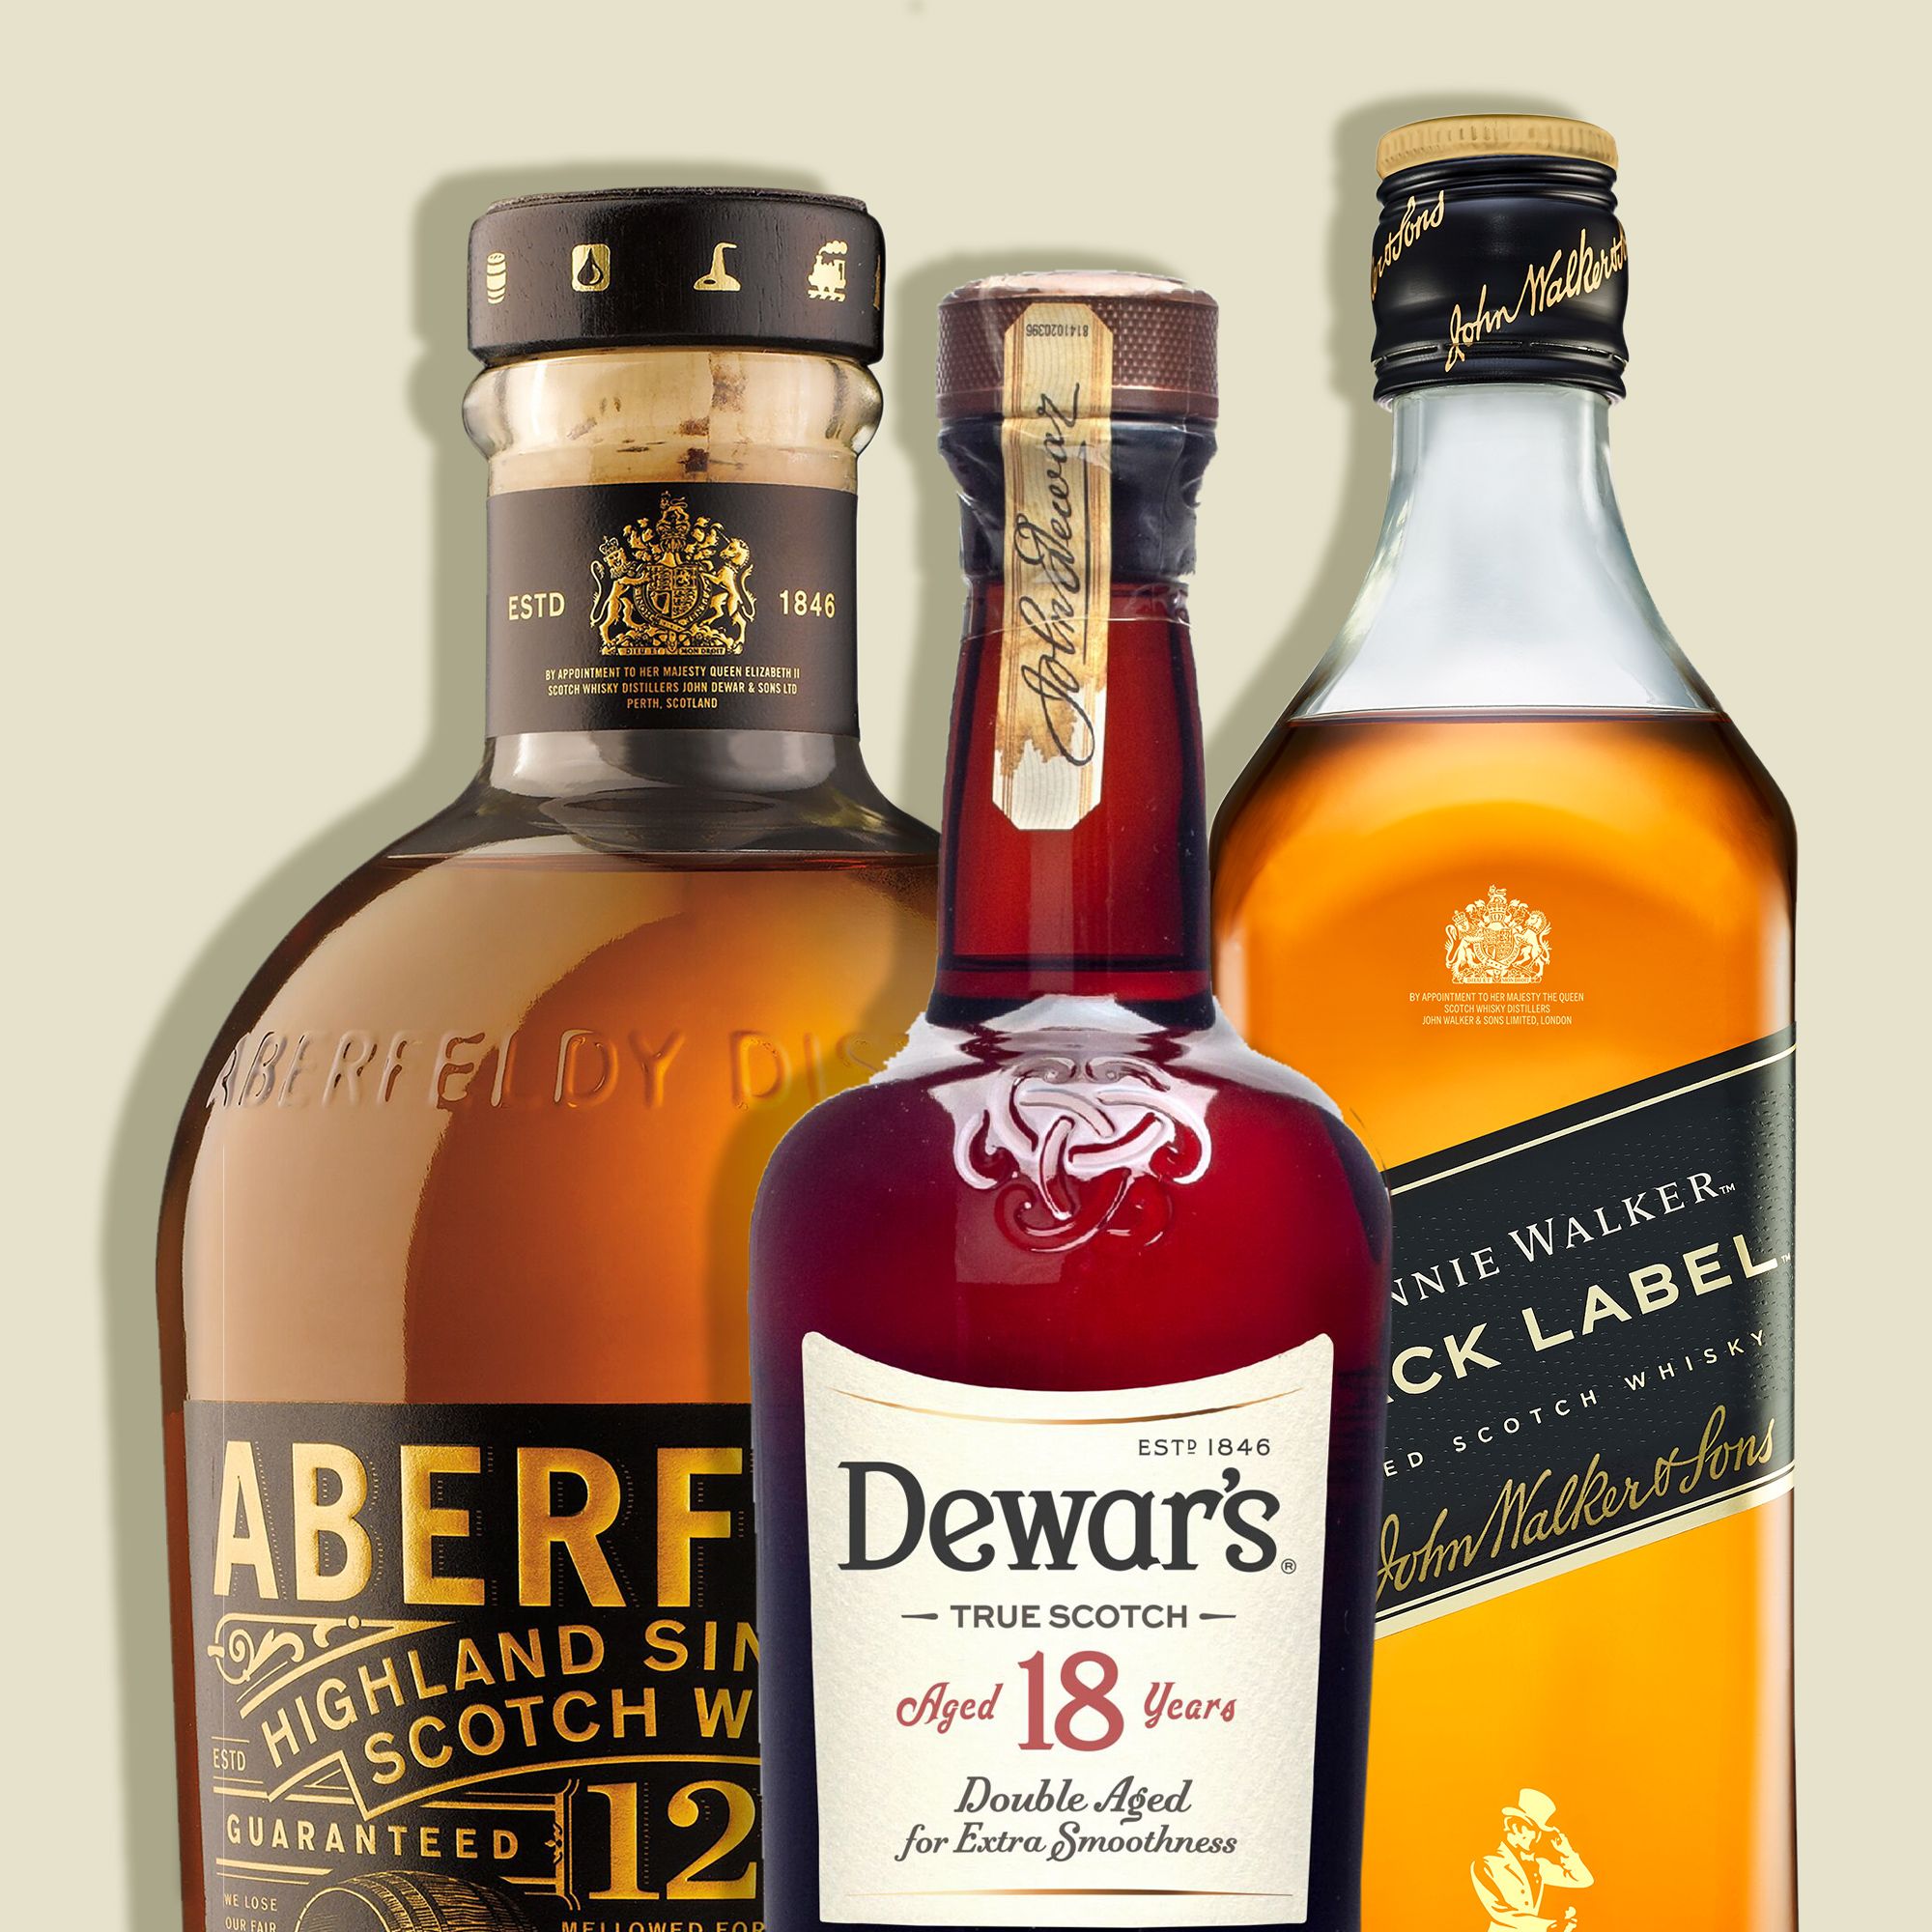 The Best Blended Scotch Is Made From Seriously Good Single Malt Whiskies